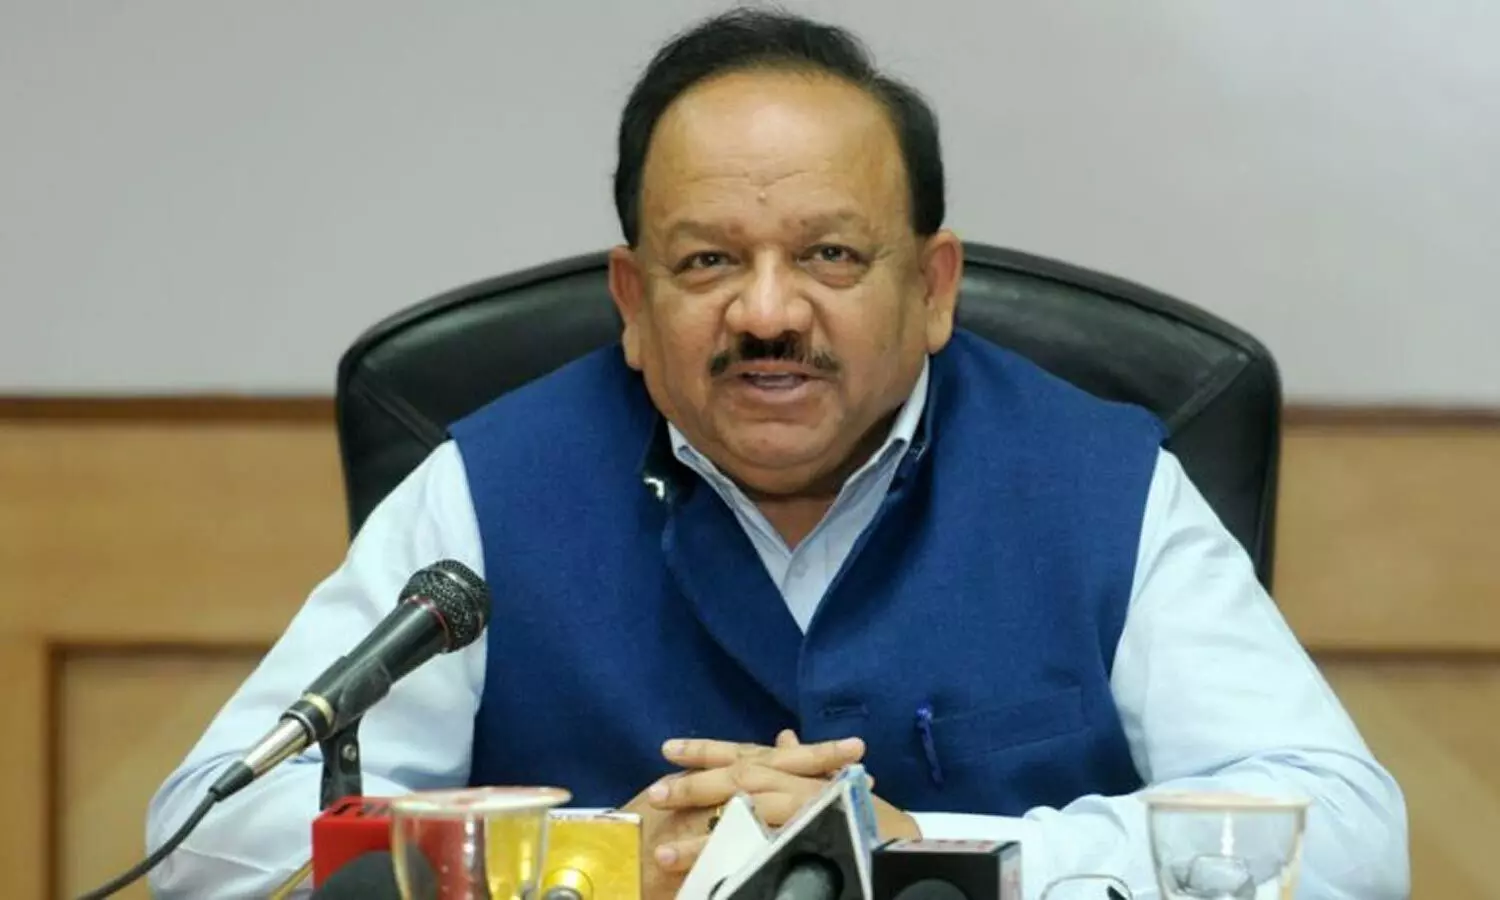 COVID 19 spread contained in India: Dr Harsh Vardhan